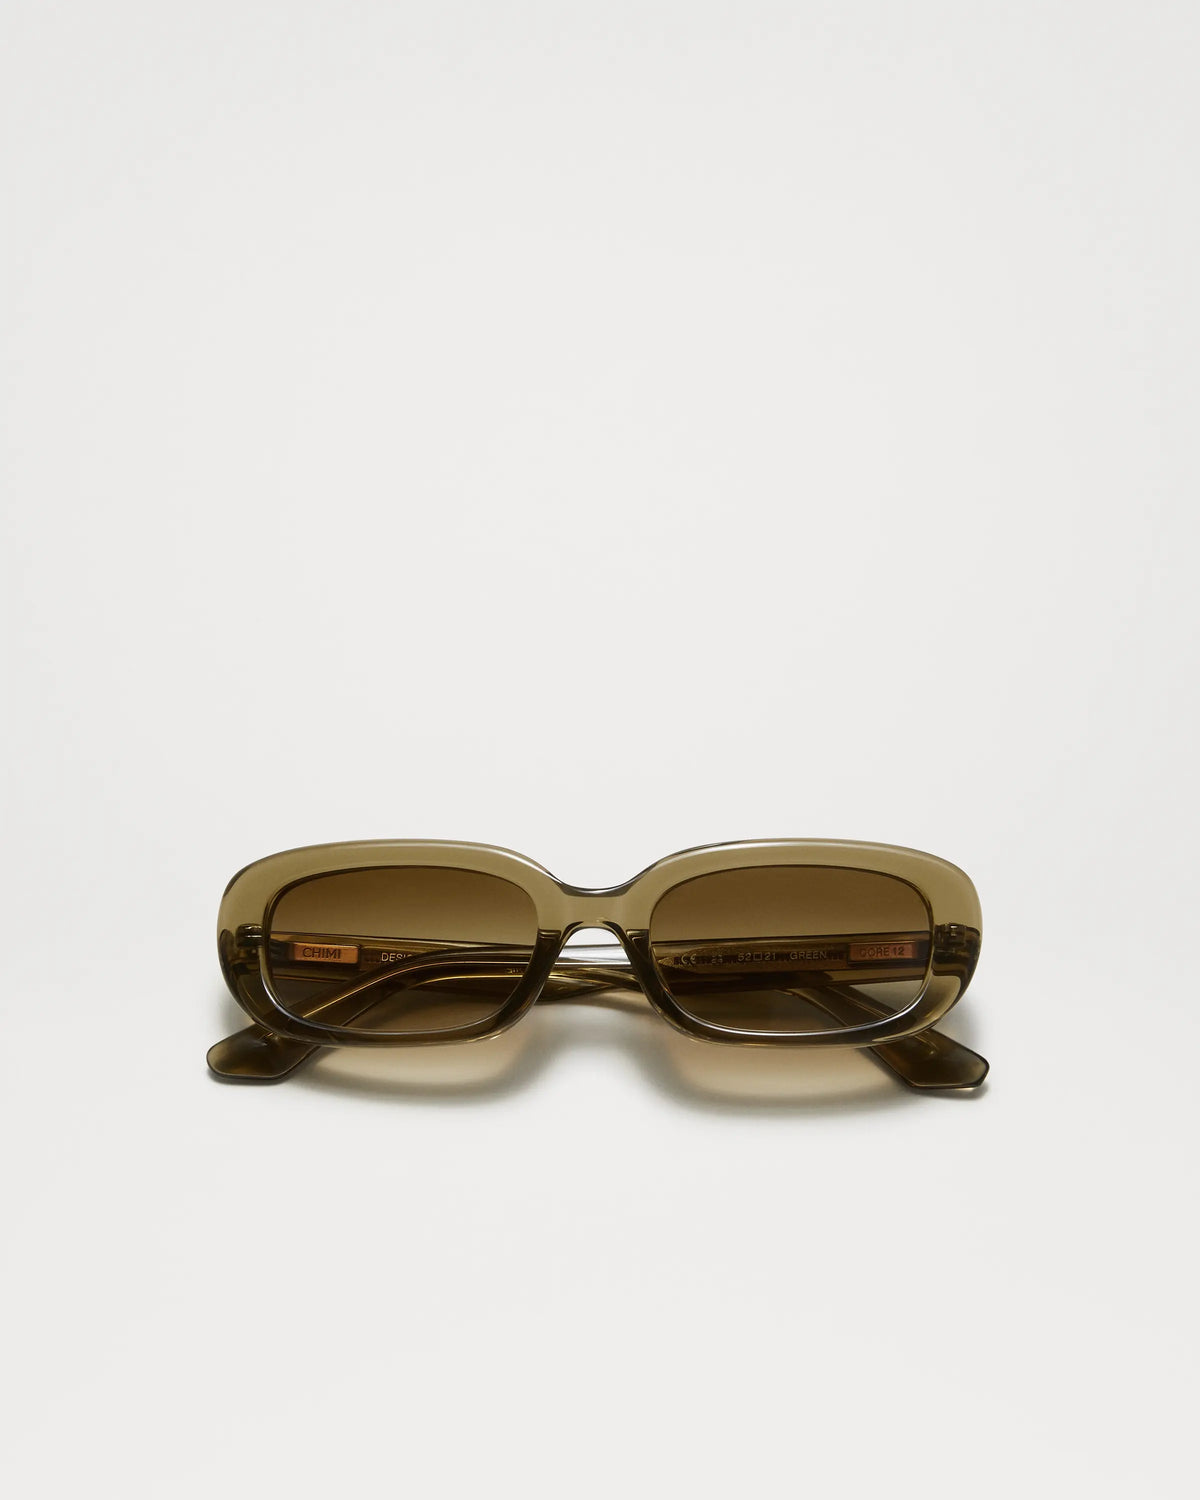 Green oval sunglasses with a green lense